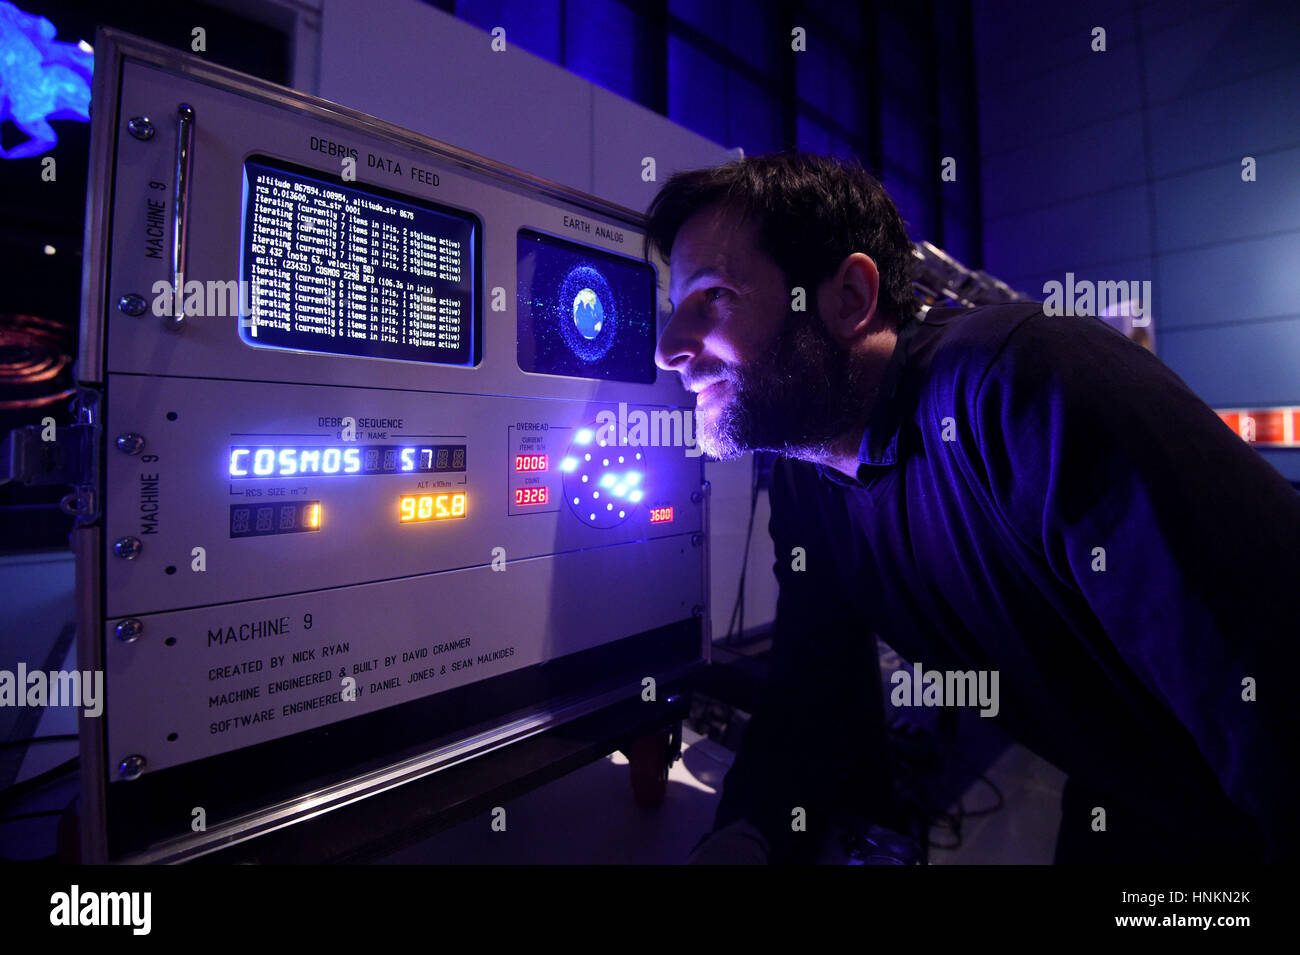 Creator Nick Ryan examines Machine 9, an electromechanical sound instrument that transforms the movement of 27,000 pieces of space junk into sound in real time, is put on display at the Science Museum in London. Stock Photo